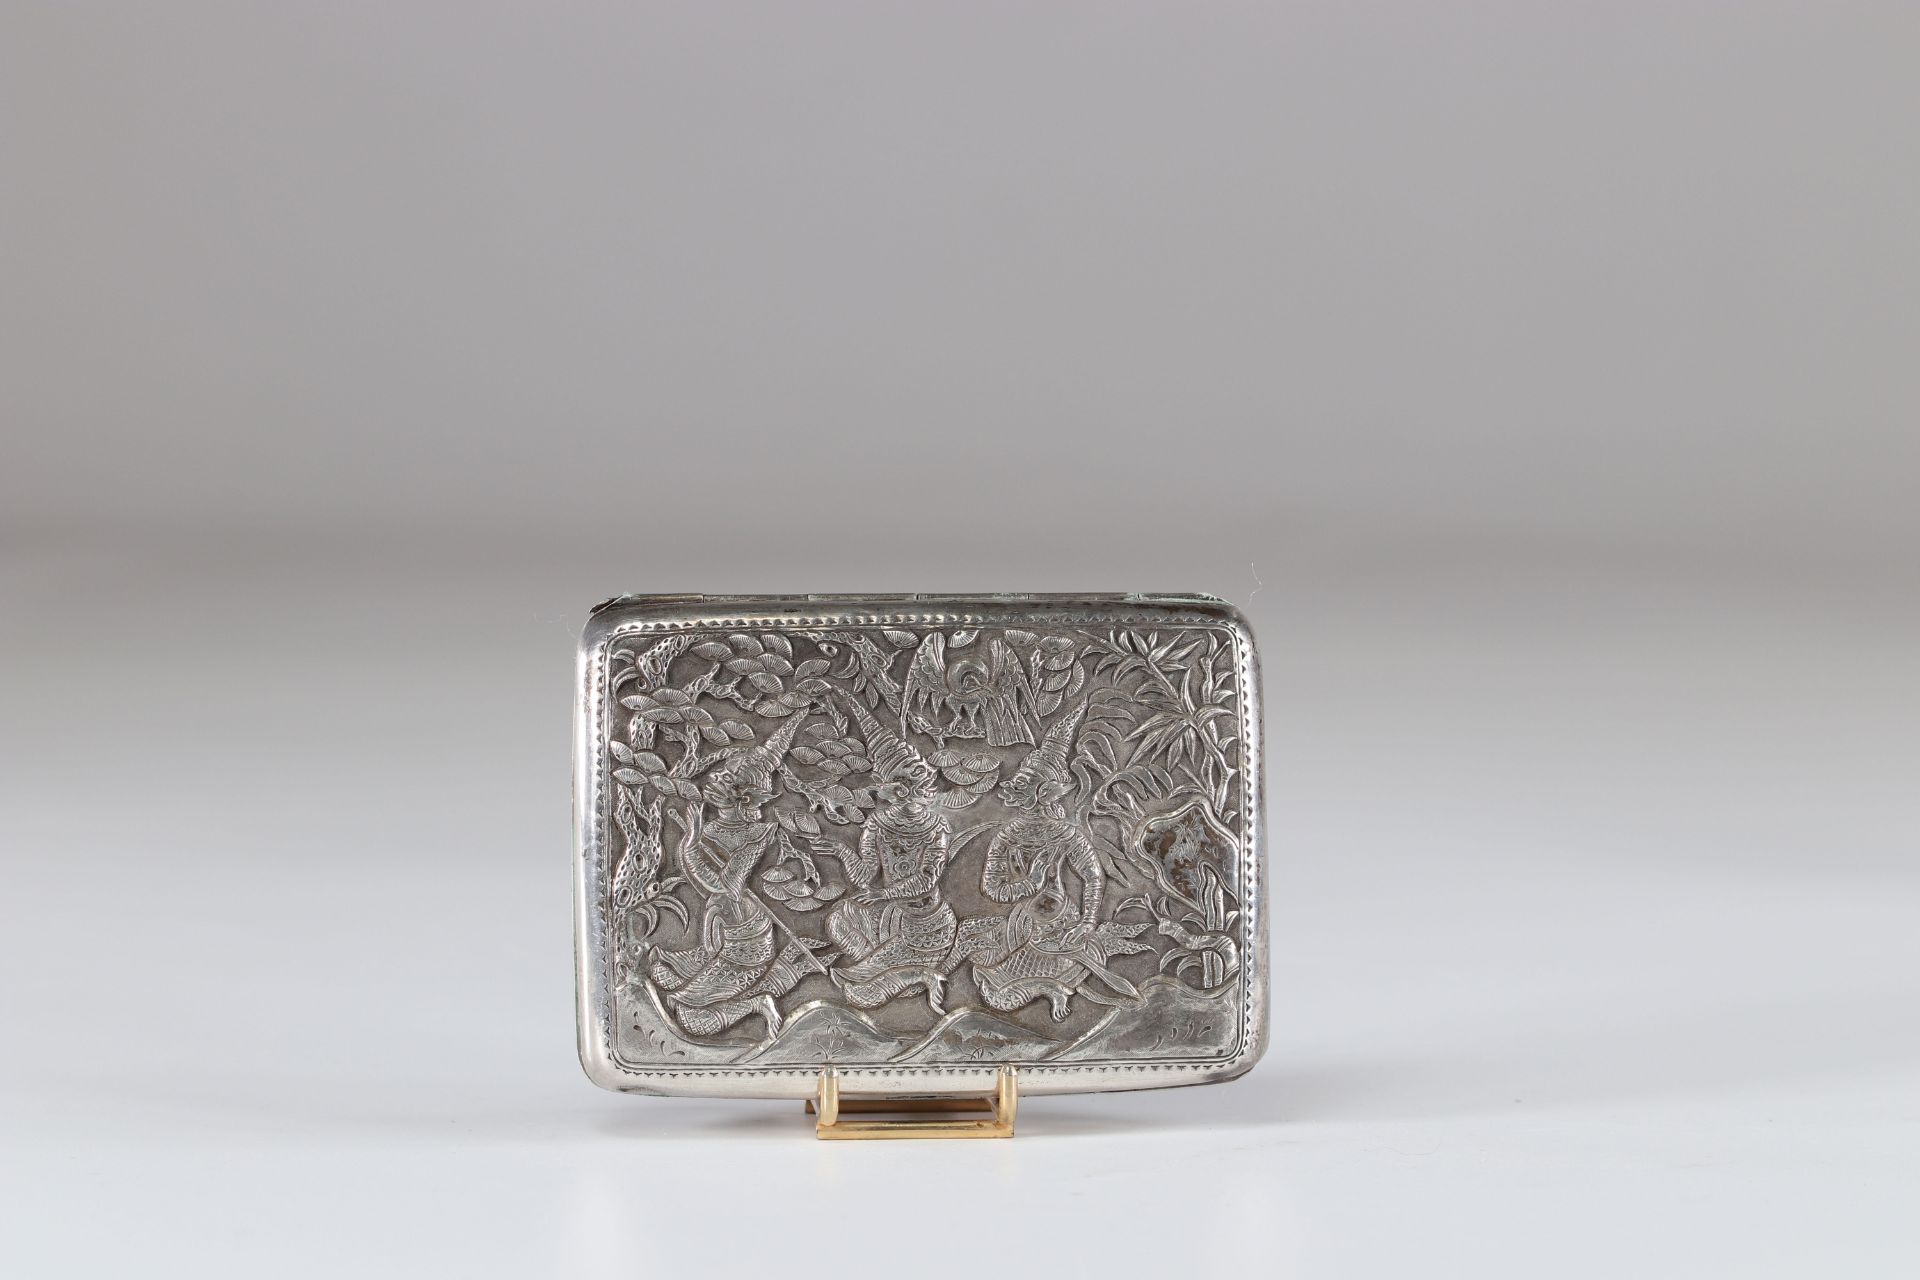 Thailand silver box early 20th century - Image 2 of 2